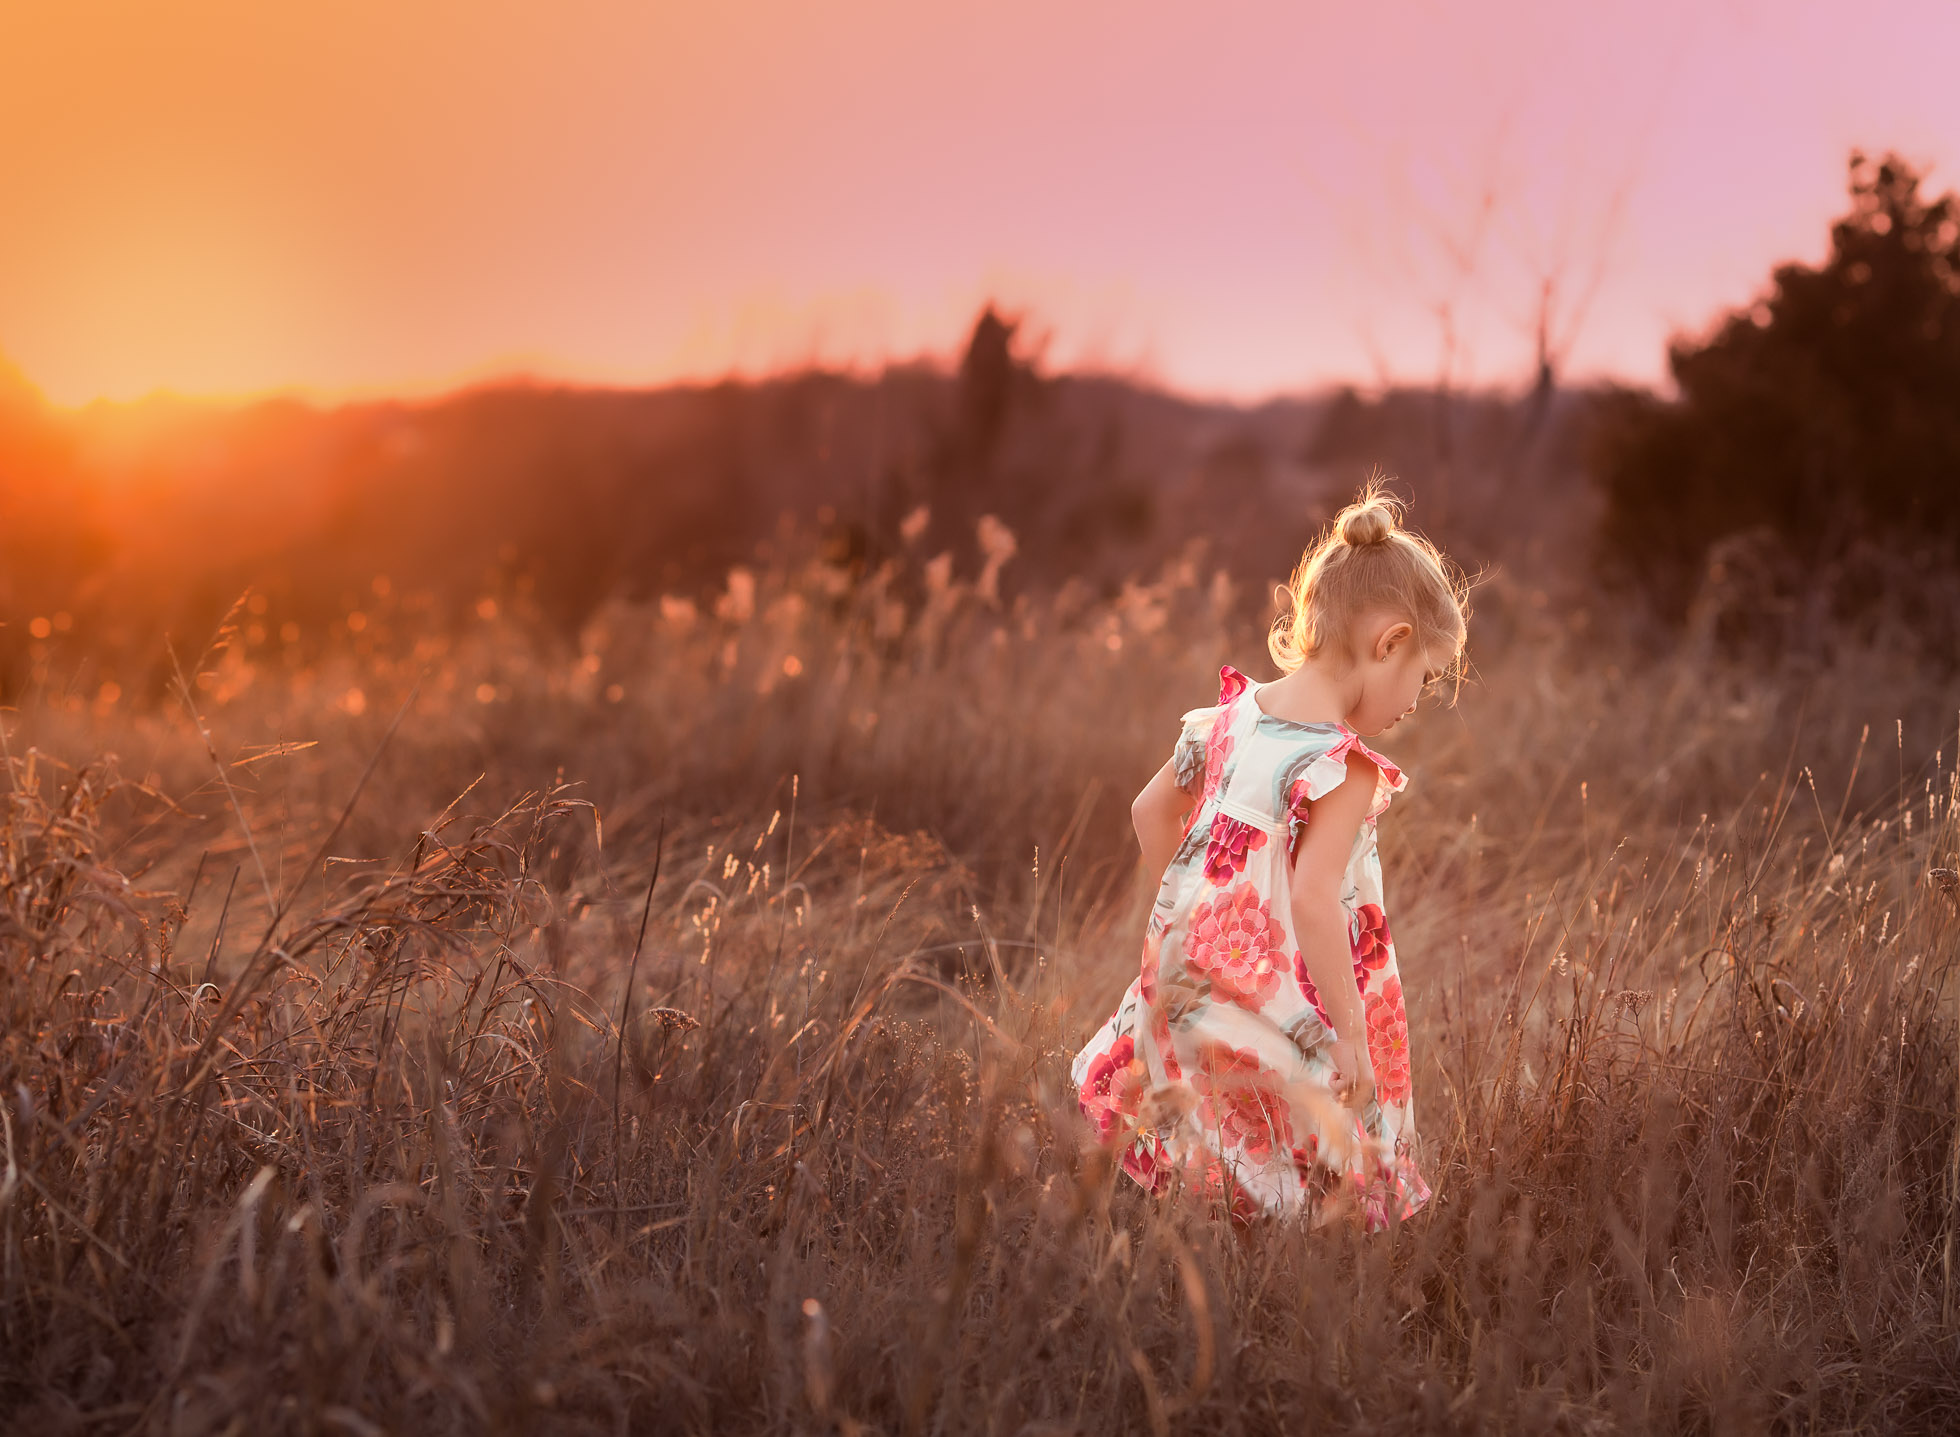 Warm Winter Sunset by Kate Luber